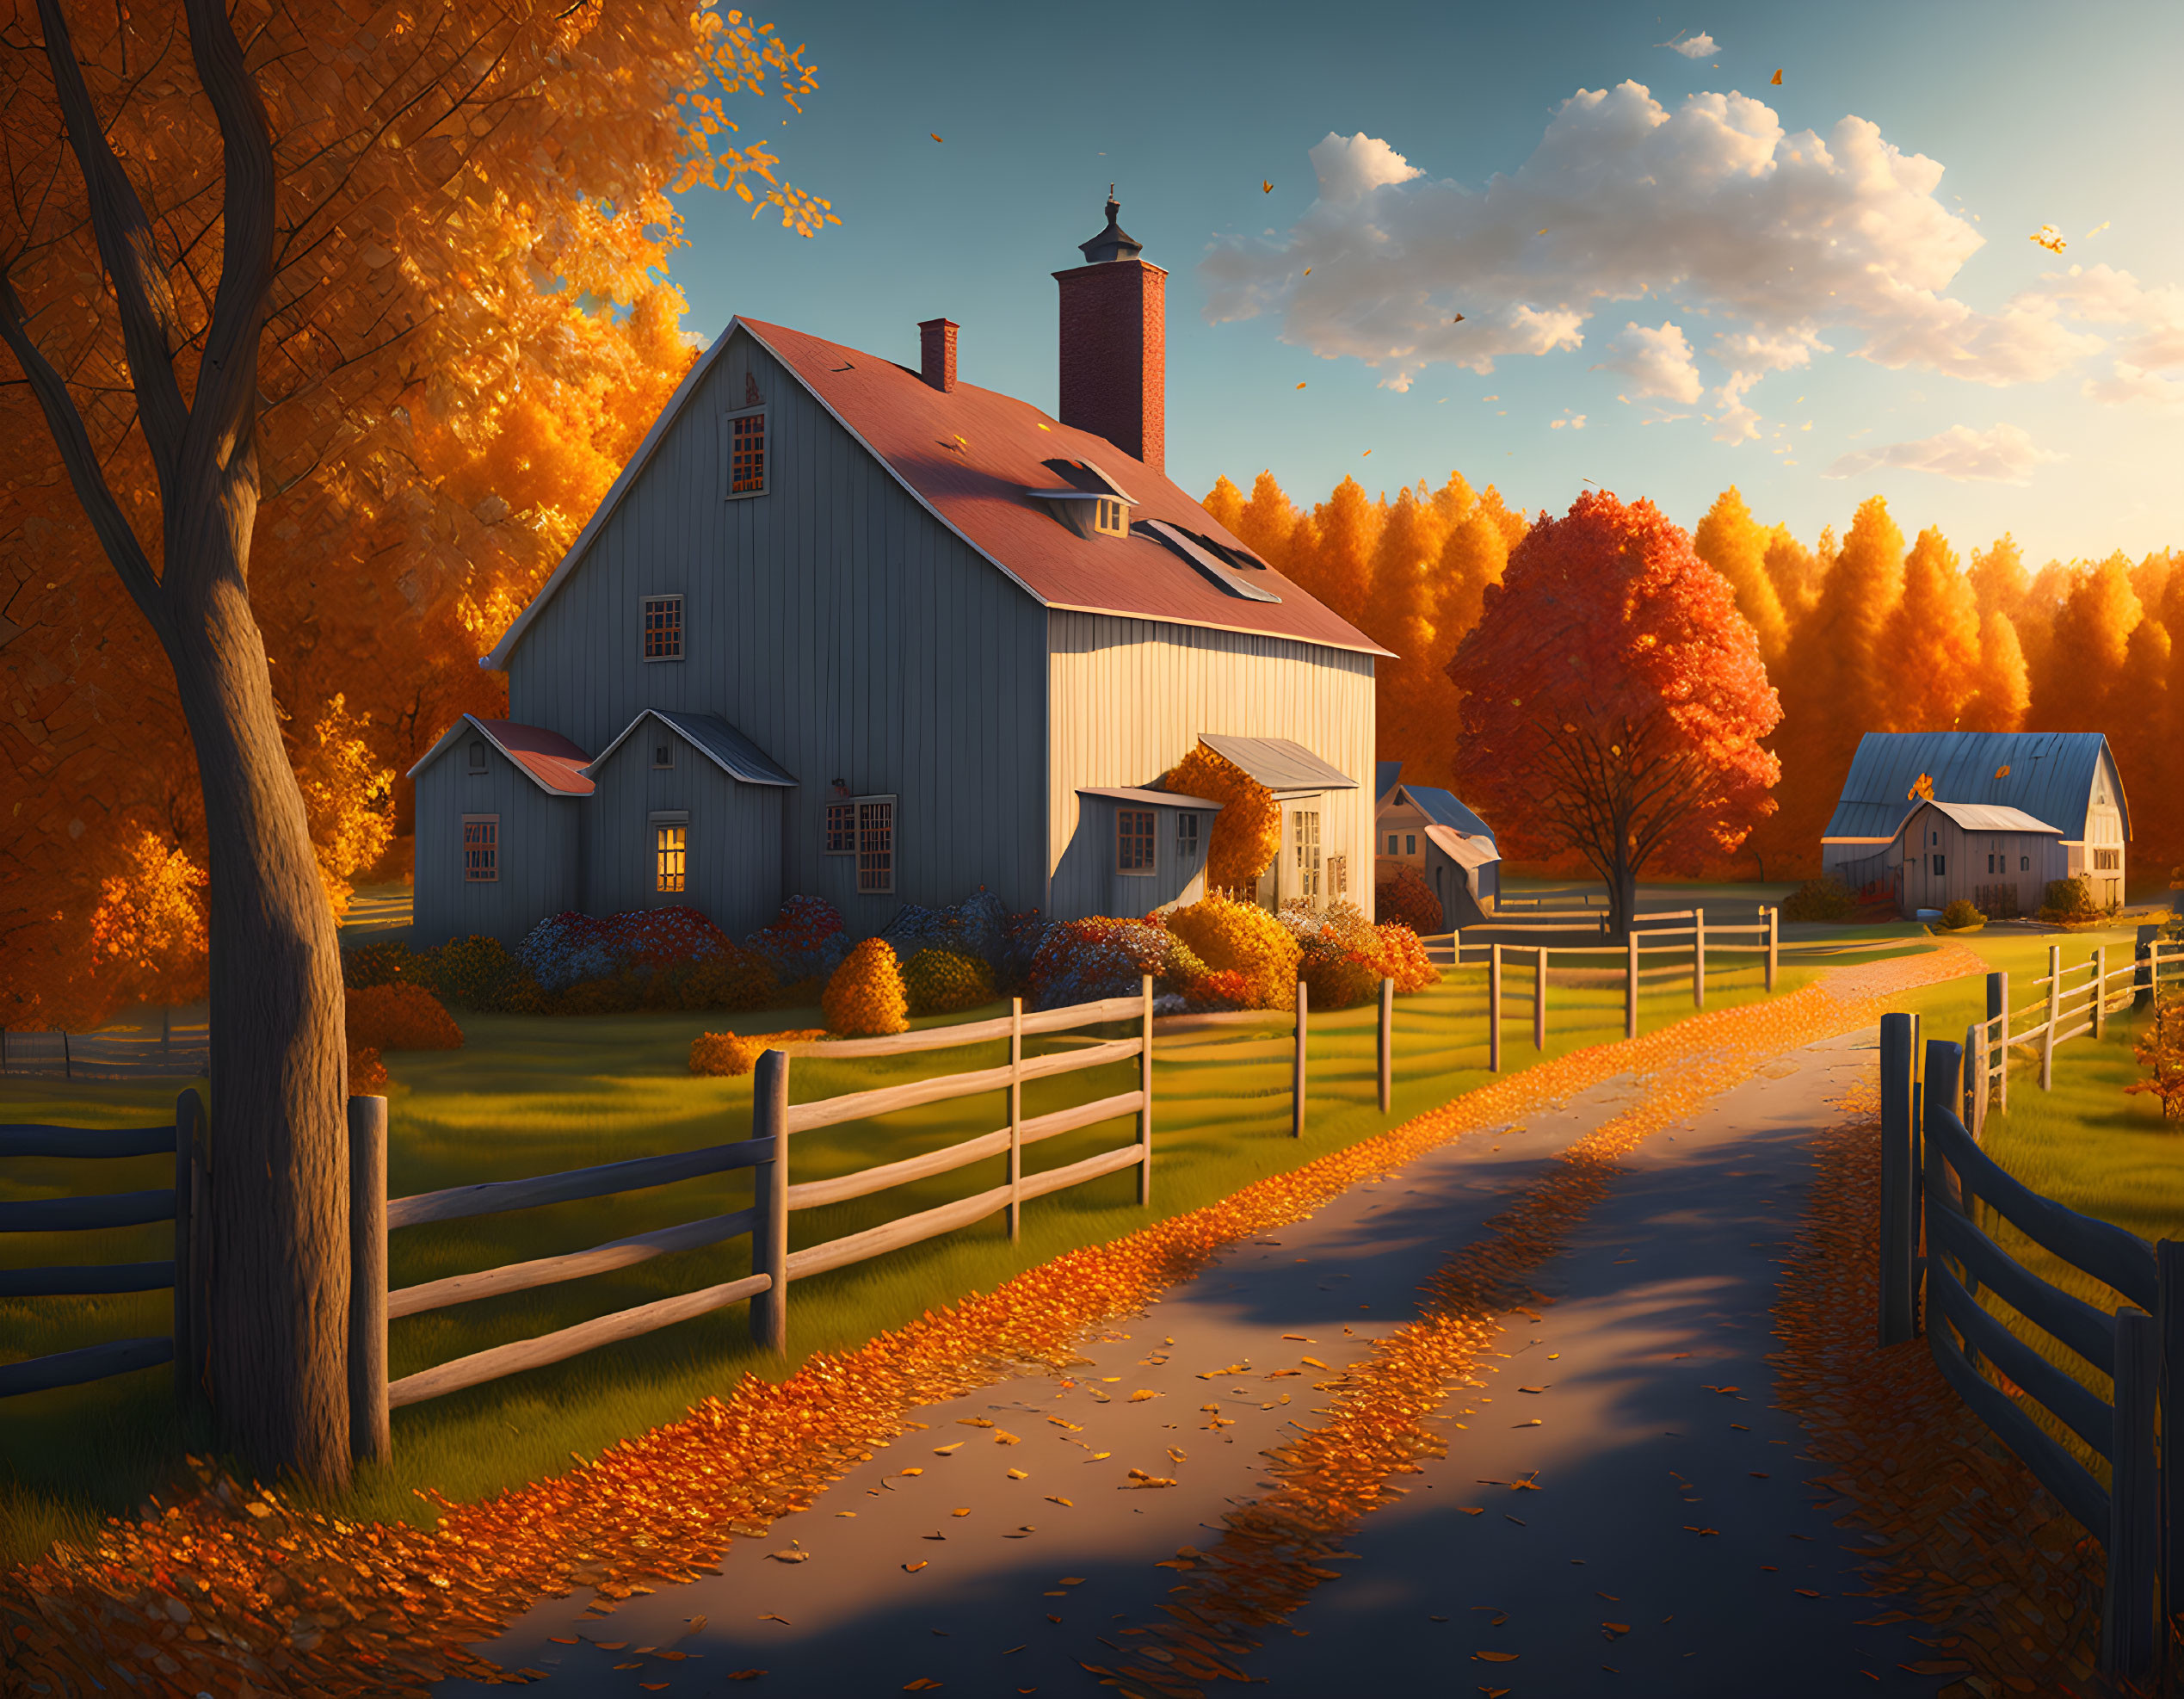 Blue barn in rustic farm with autumn trees under golden sunset.